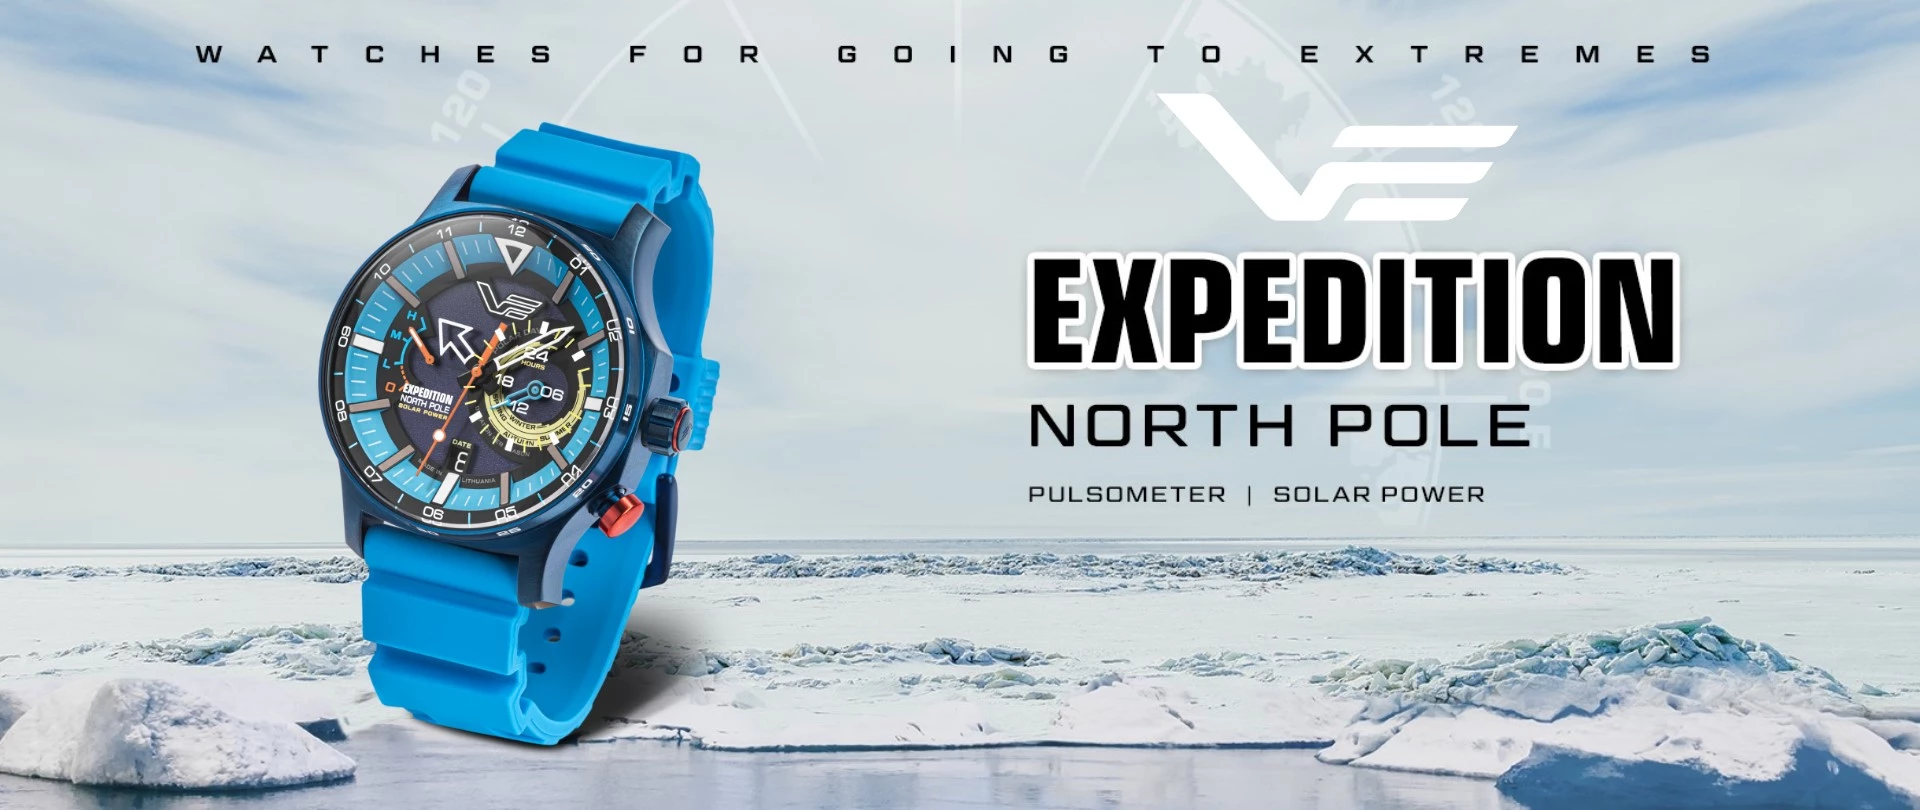 NEW EXPEDITION NORTH POLE